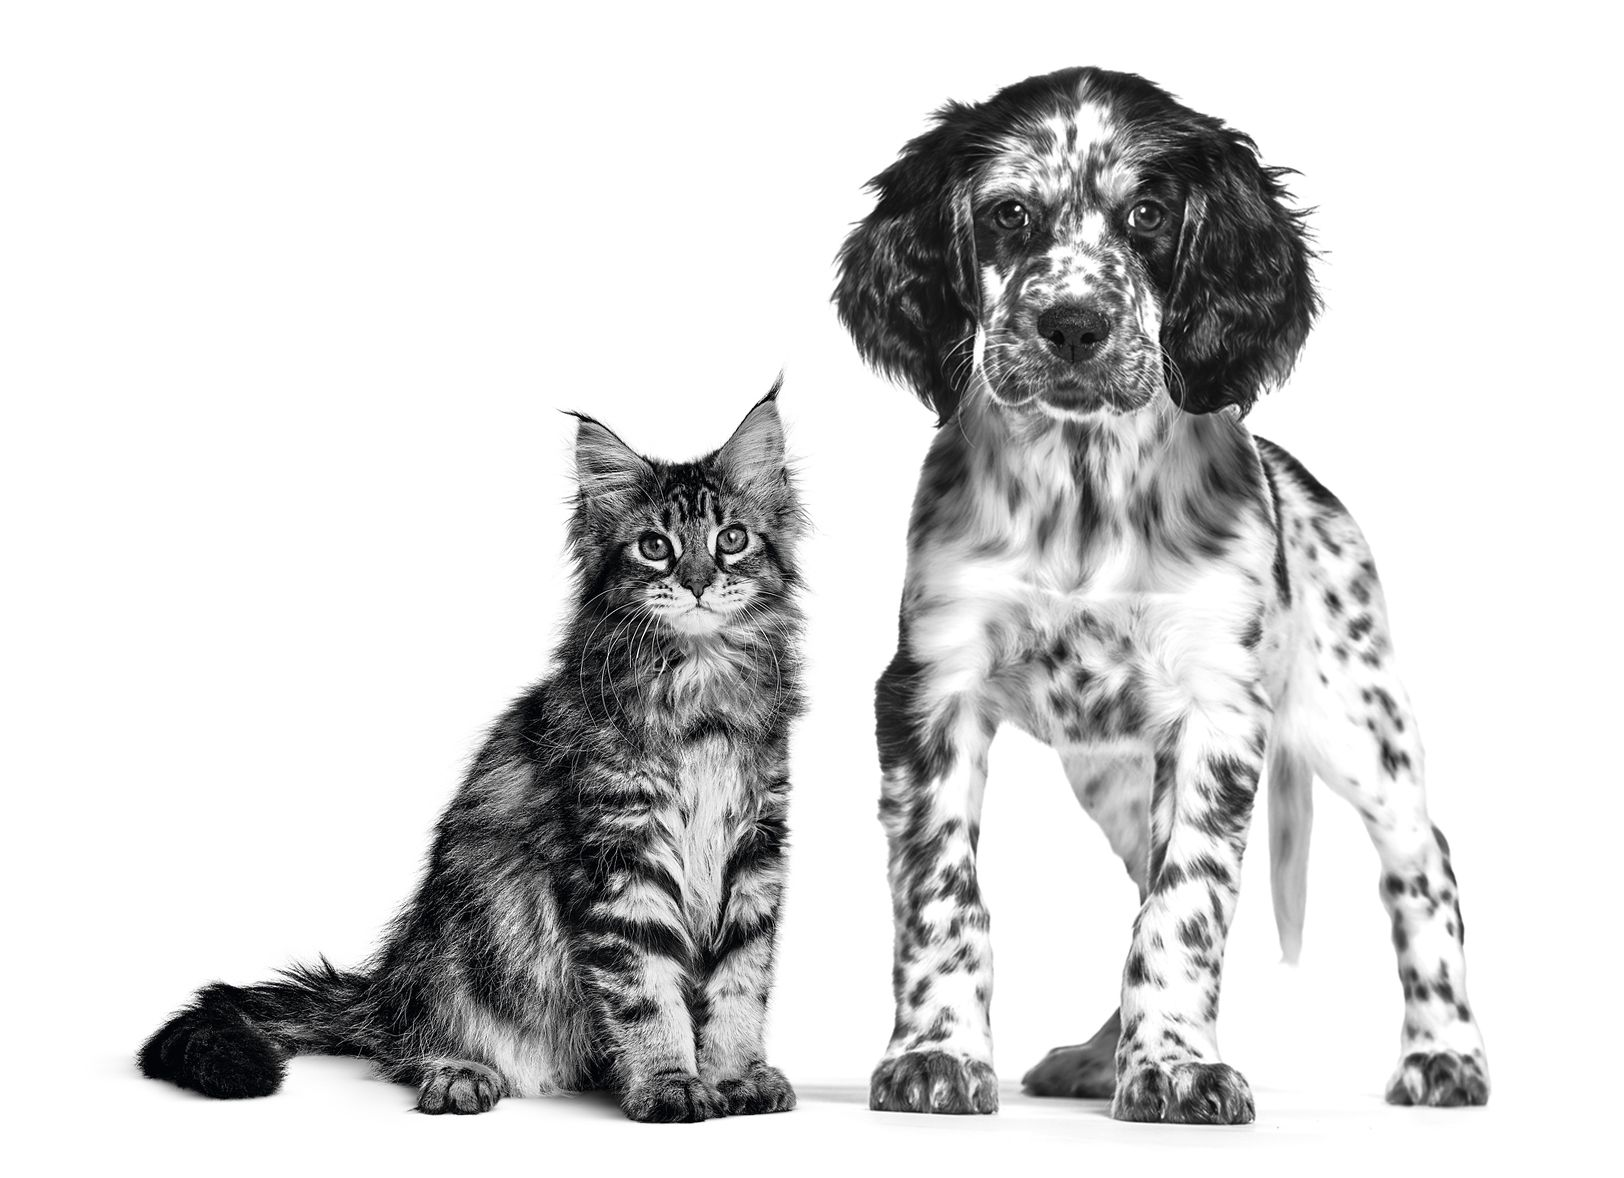 English setter and Maine coon